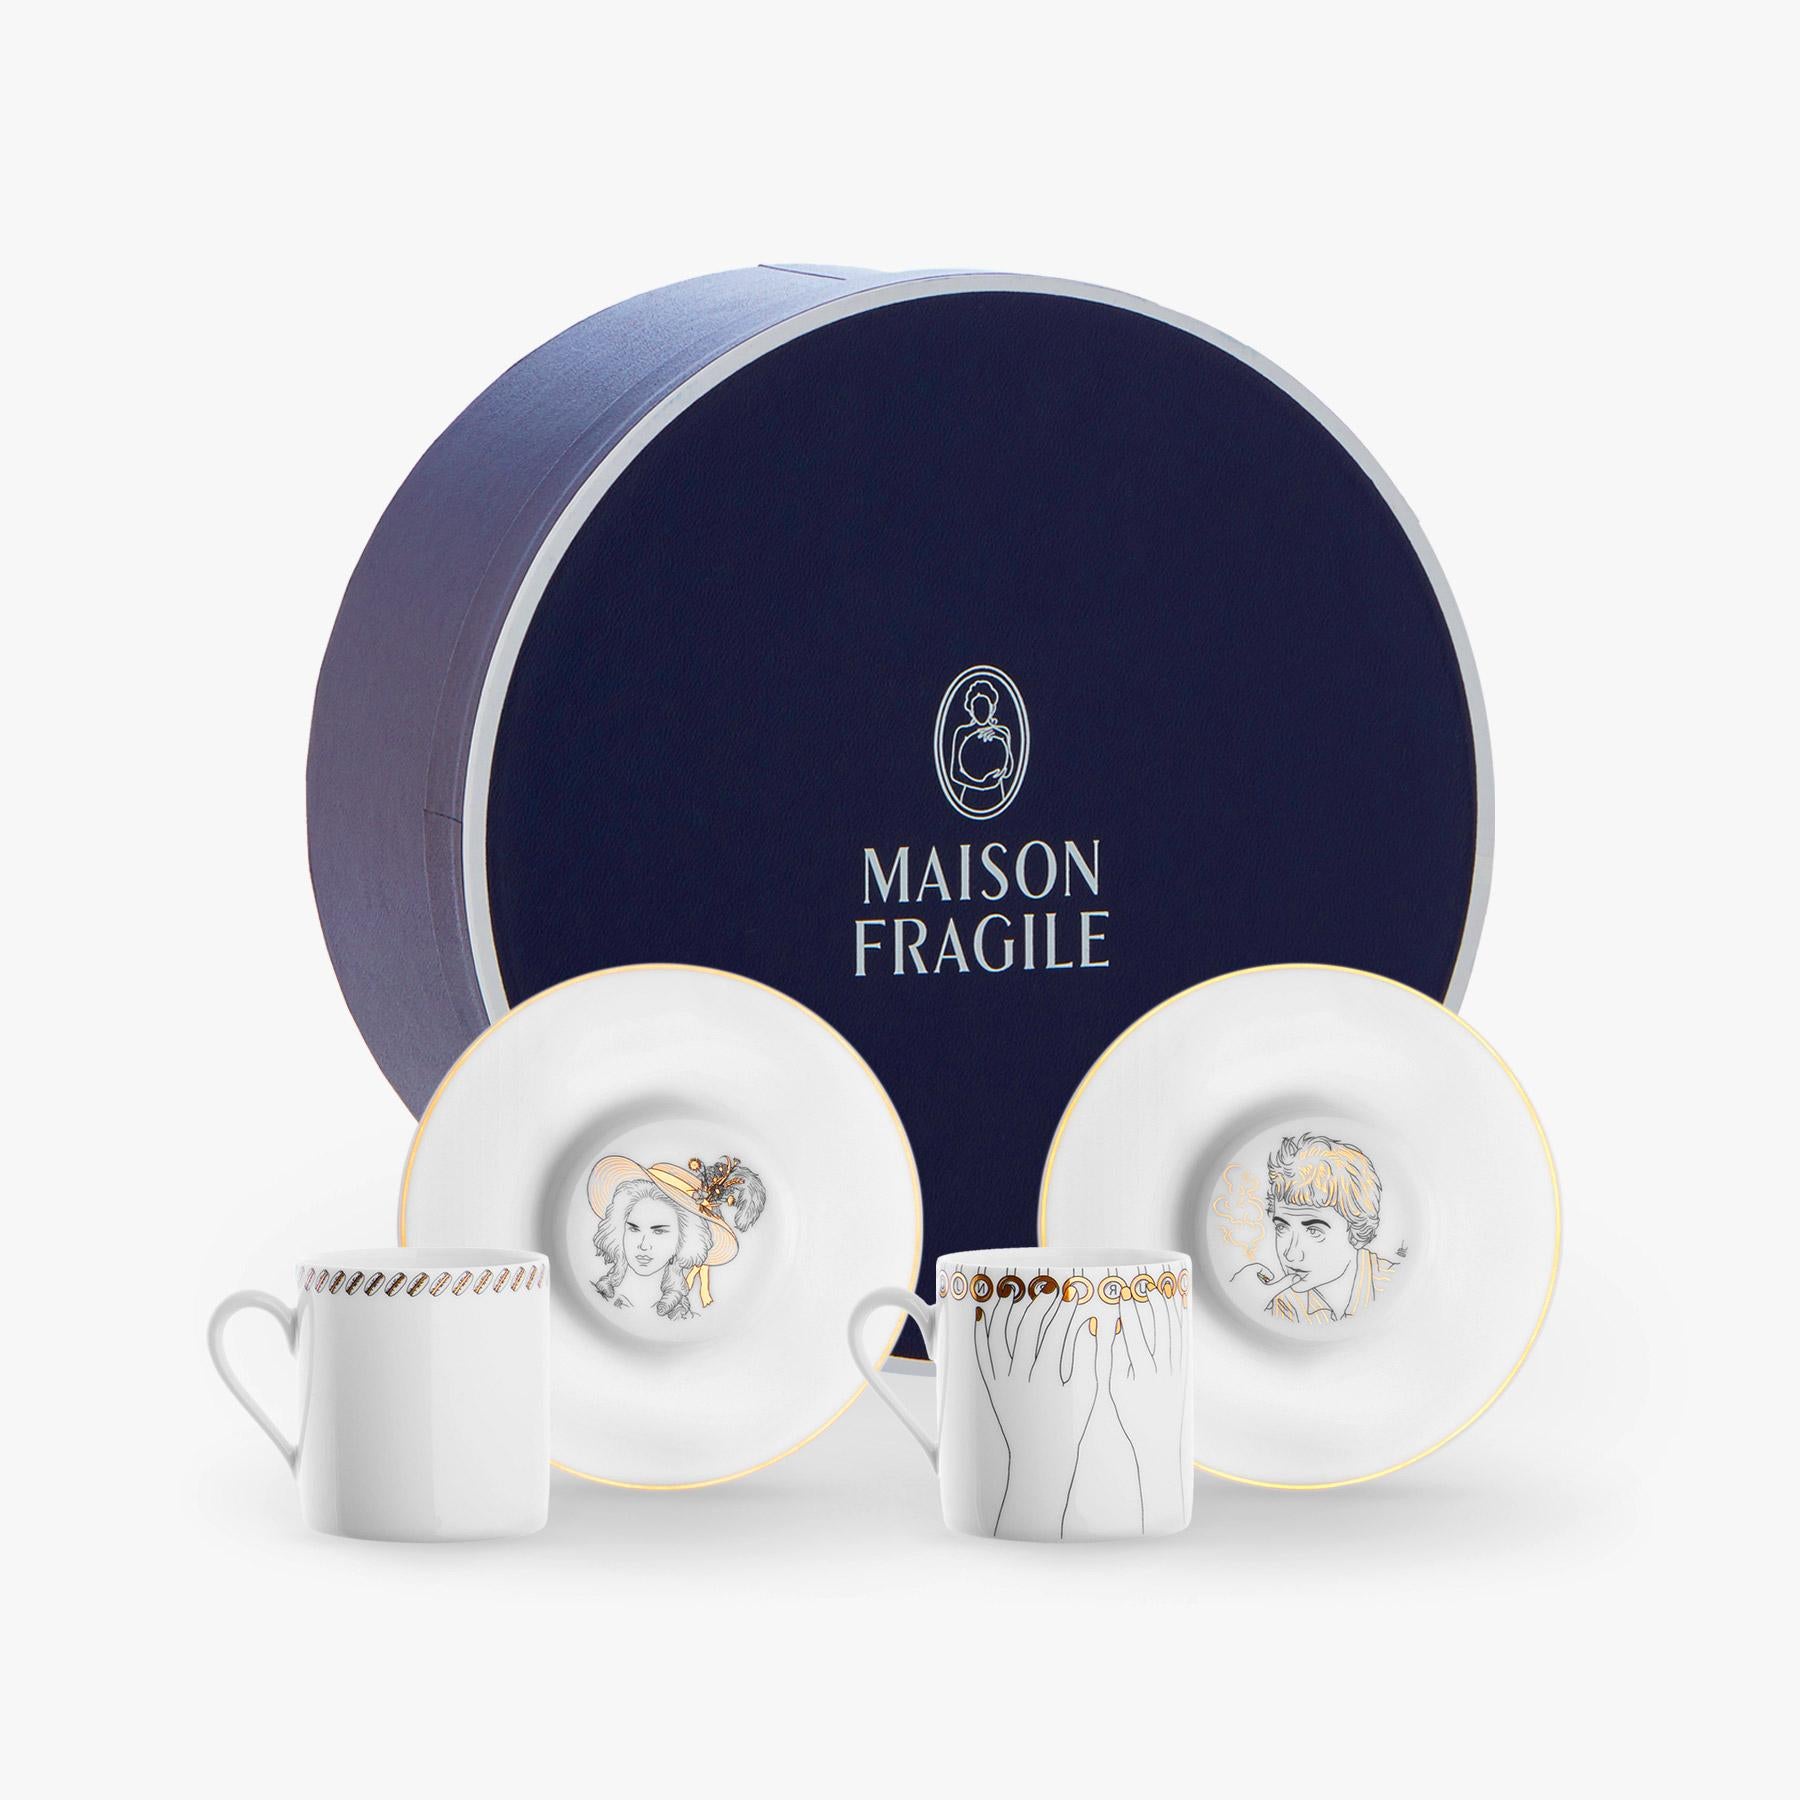 Maison Fragile and the Parisian illustrator artist Jean-Michel Tixier have joined together to create a collection that pays tribute to these men and women, key figures of history, who have made Paris as we know it.

Box of 4 coffee cups and saucers